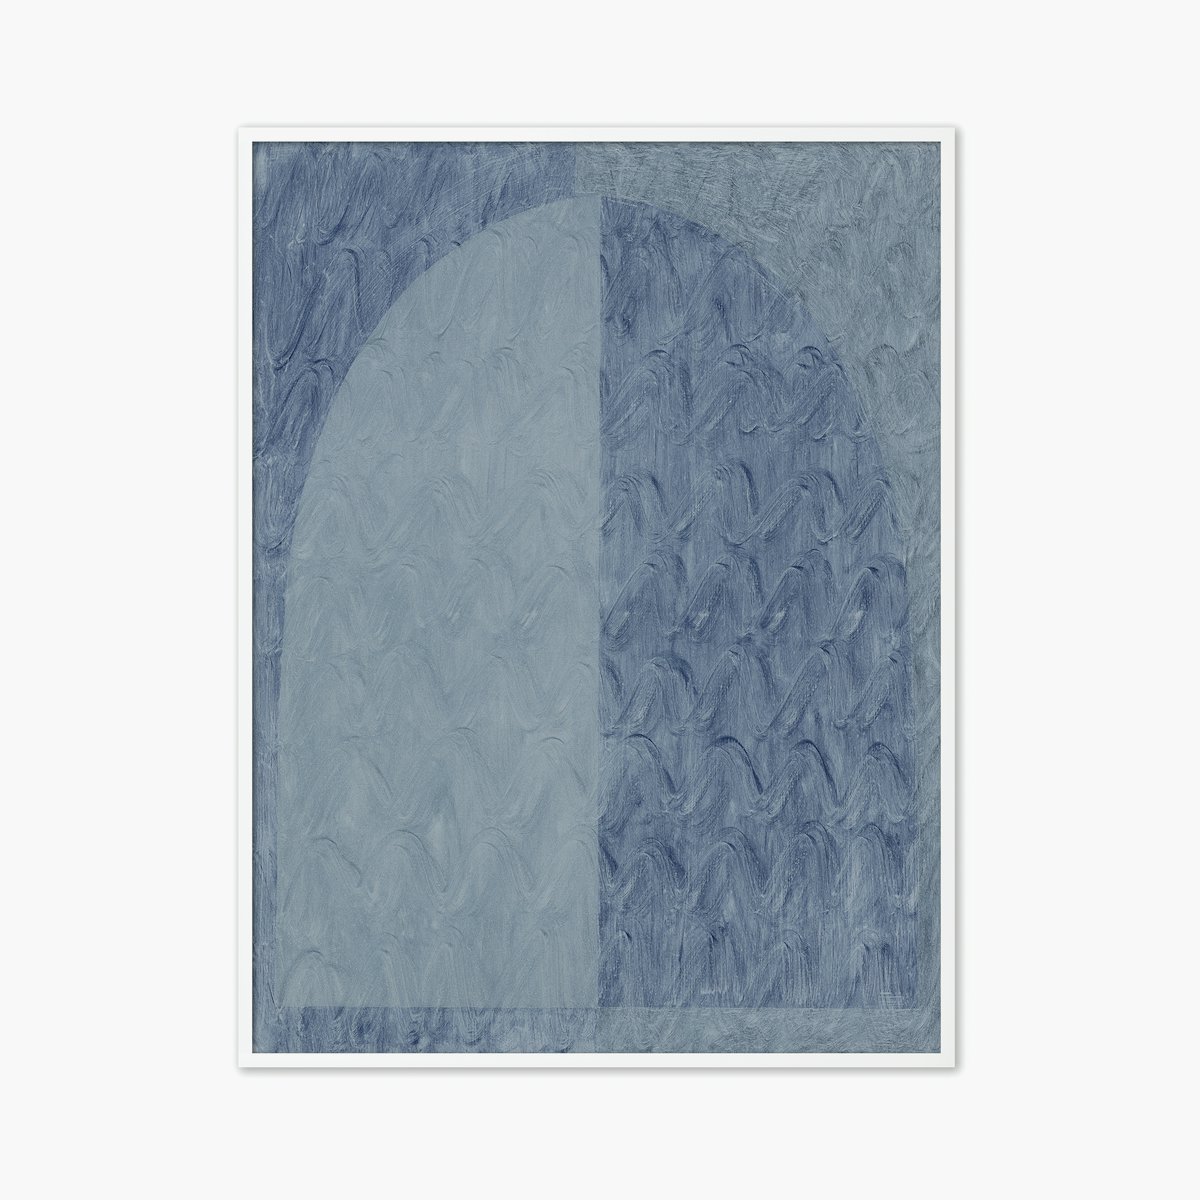 "Blue Arch in Squiggle Fog" by Aschely Vaughan Cone